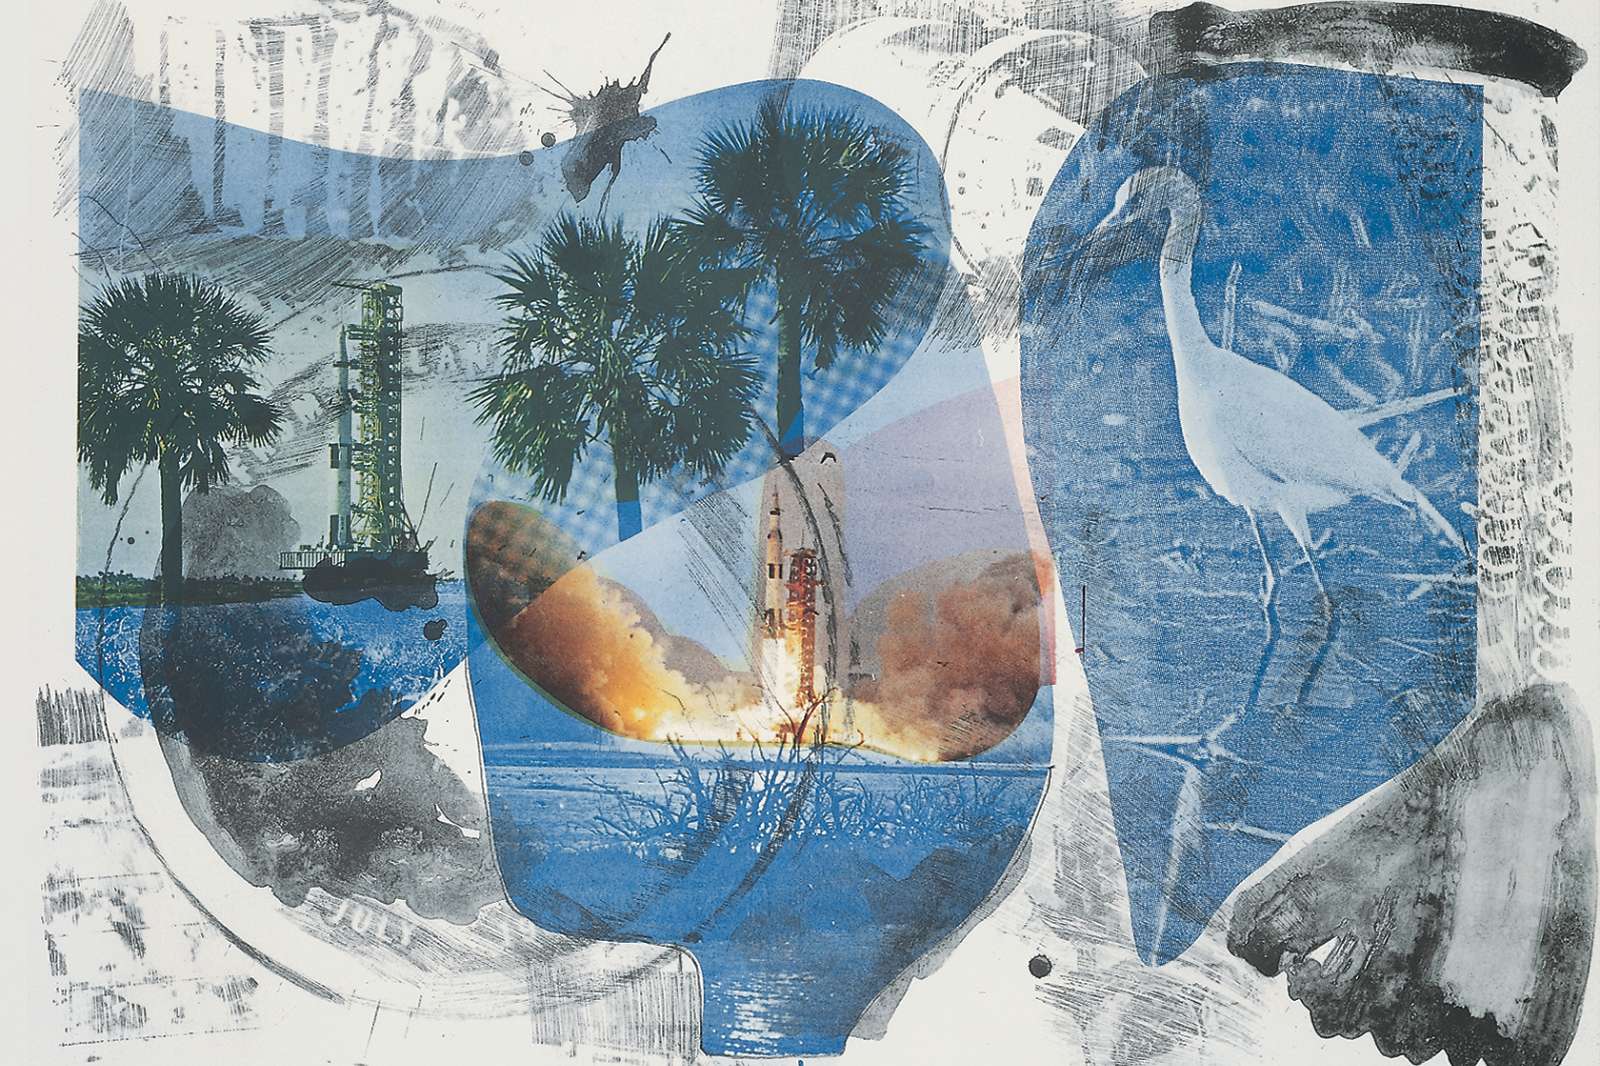 Robert Rauschenberg  Local Means (Stoned Moon), 1970  Lithograph  32 3/8 x 43 1/4 inches (82.2 x 110 cm)  From an edition of 11, published by Gemini G.E.L., Los Angeles ©Robert Rauschenberg Foundation and Gemini G.E.L.